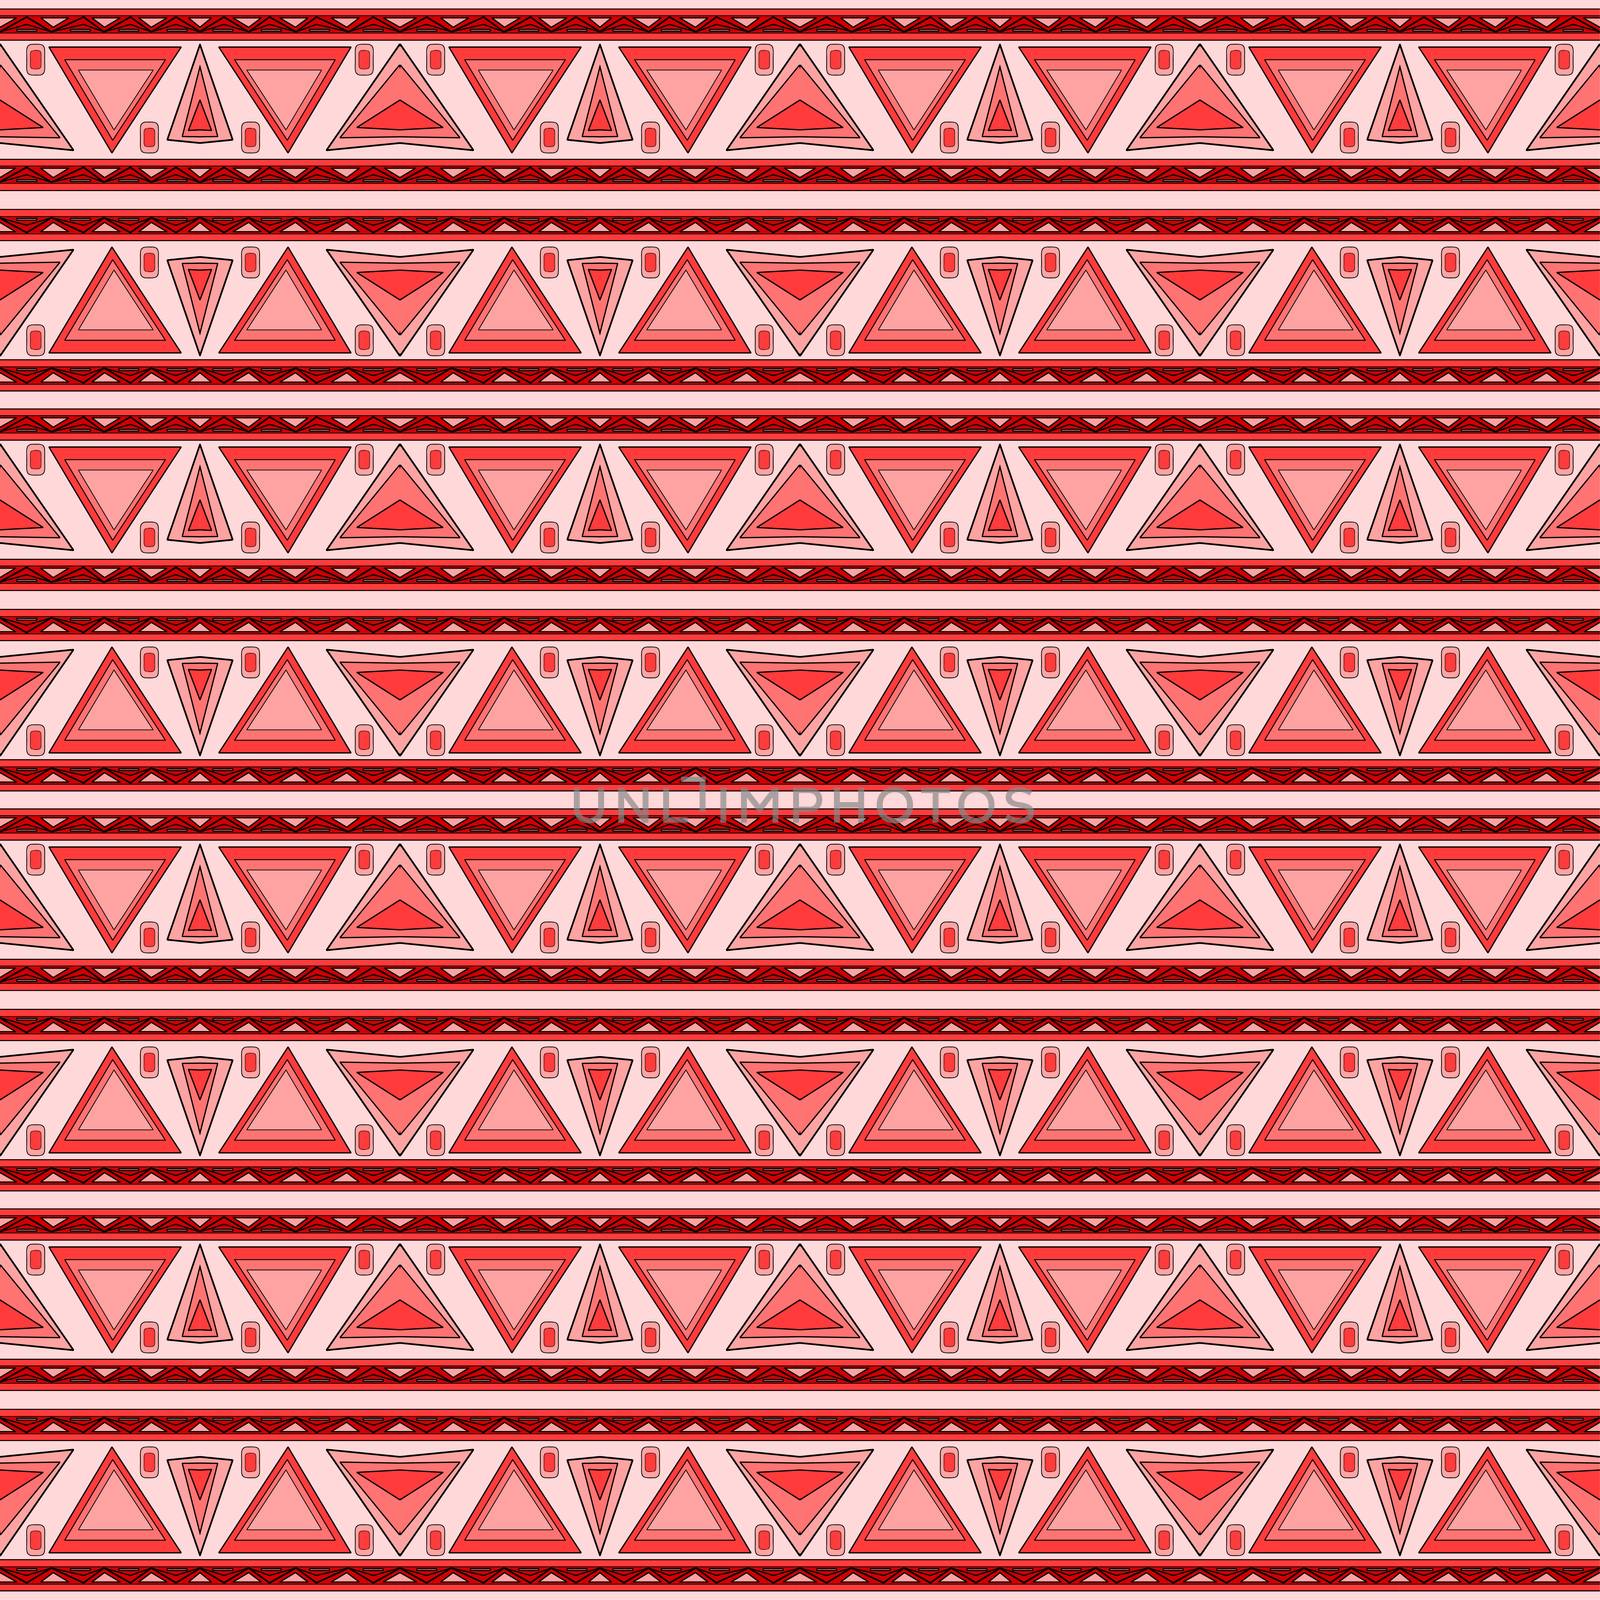 Seamless vector decorative pattern. ethnic endless background with ornamental decorative elements with traditional etnic motives, tribal geometric figures. Print for wrapping, background.